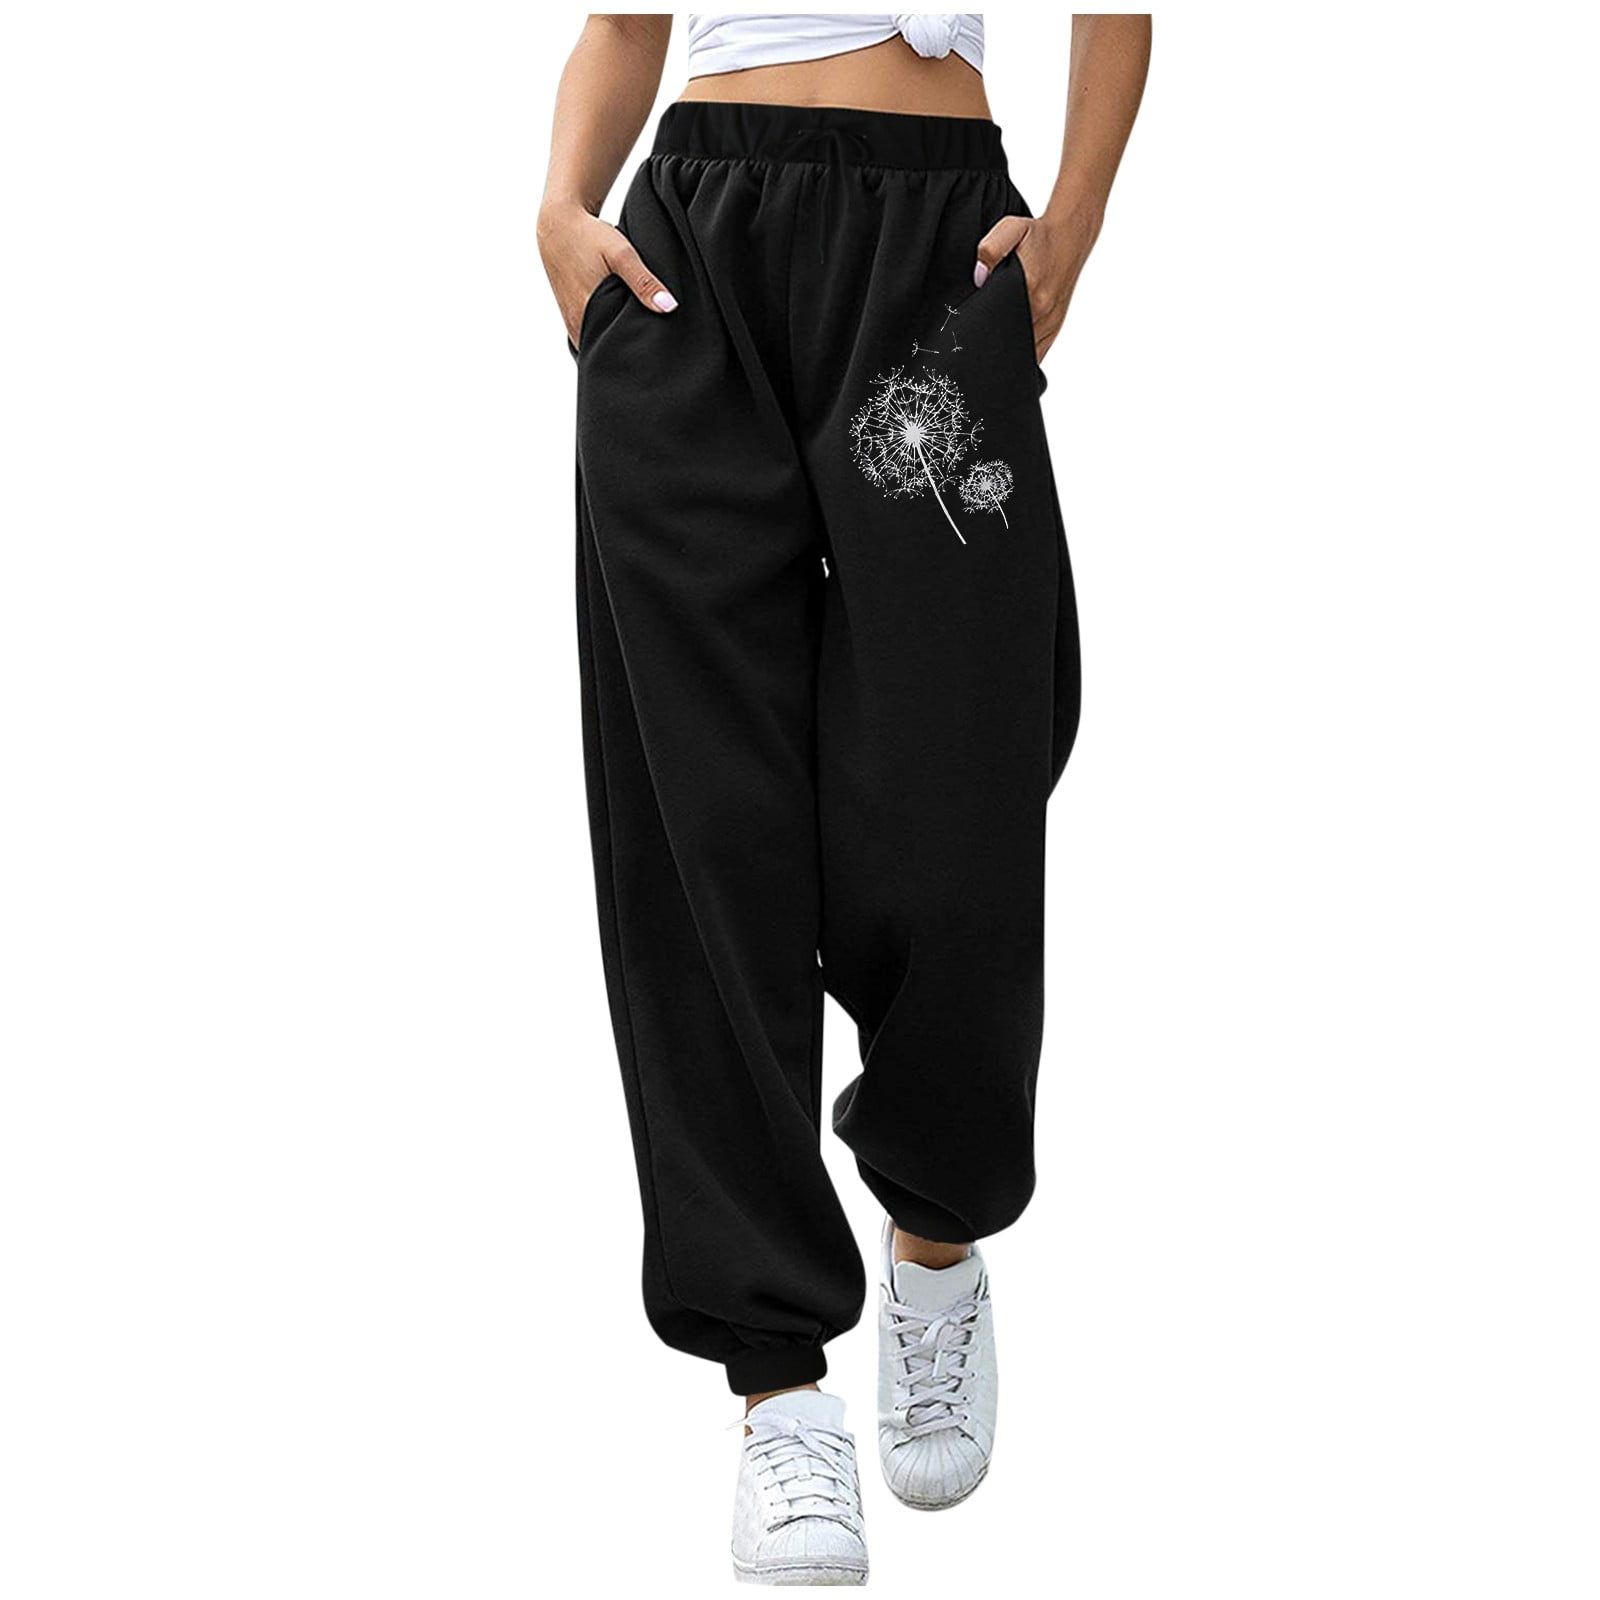 Cider High Waist Drawstring Sweatpants with Underwear Band for School Daily Casual Gym/Sports Outdoor,XL/Grey